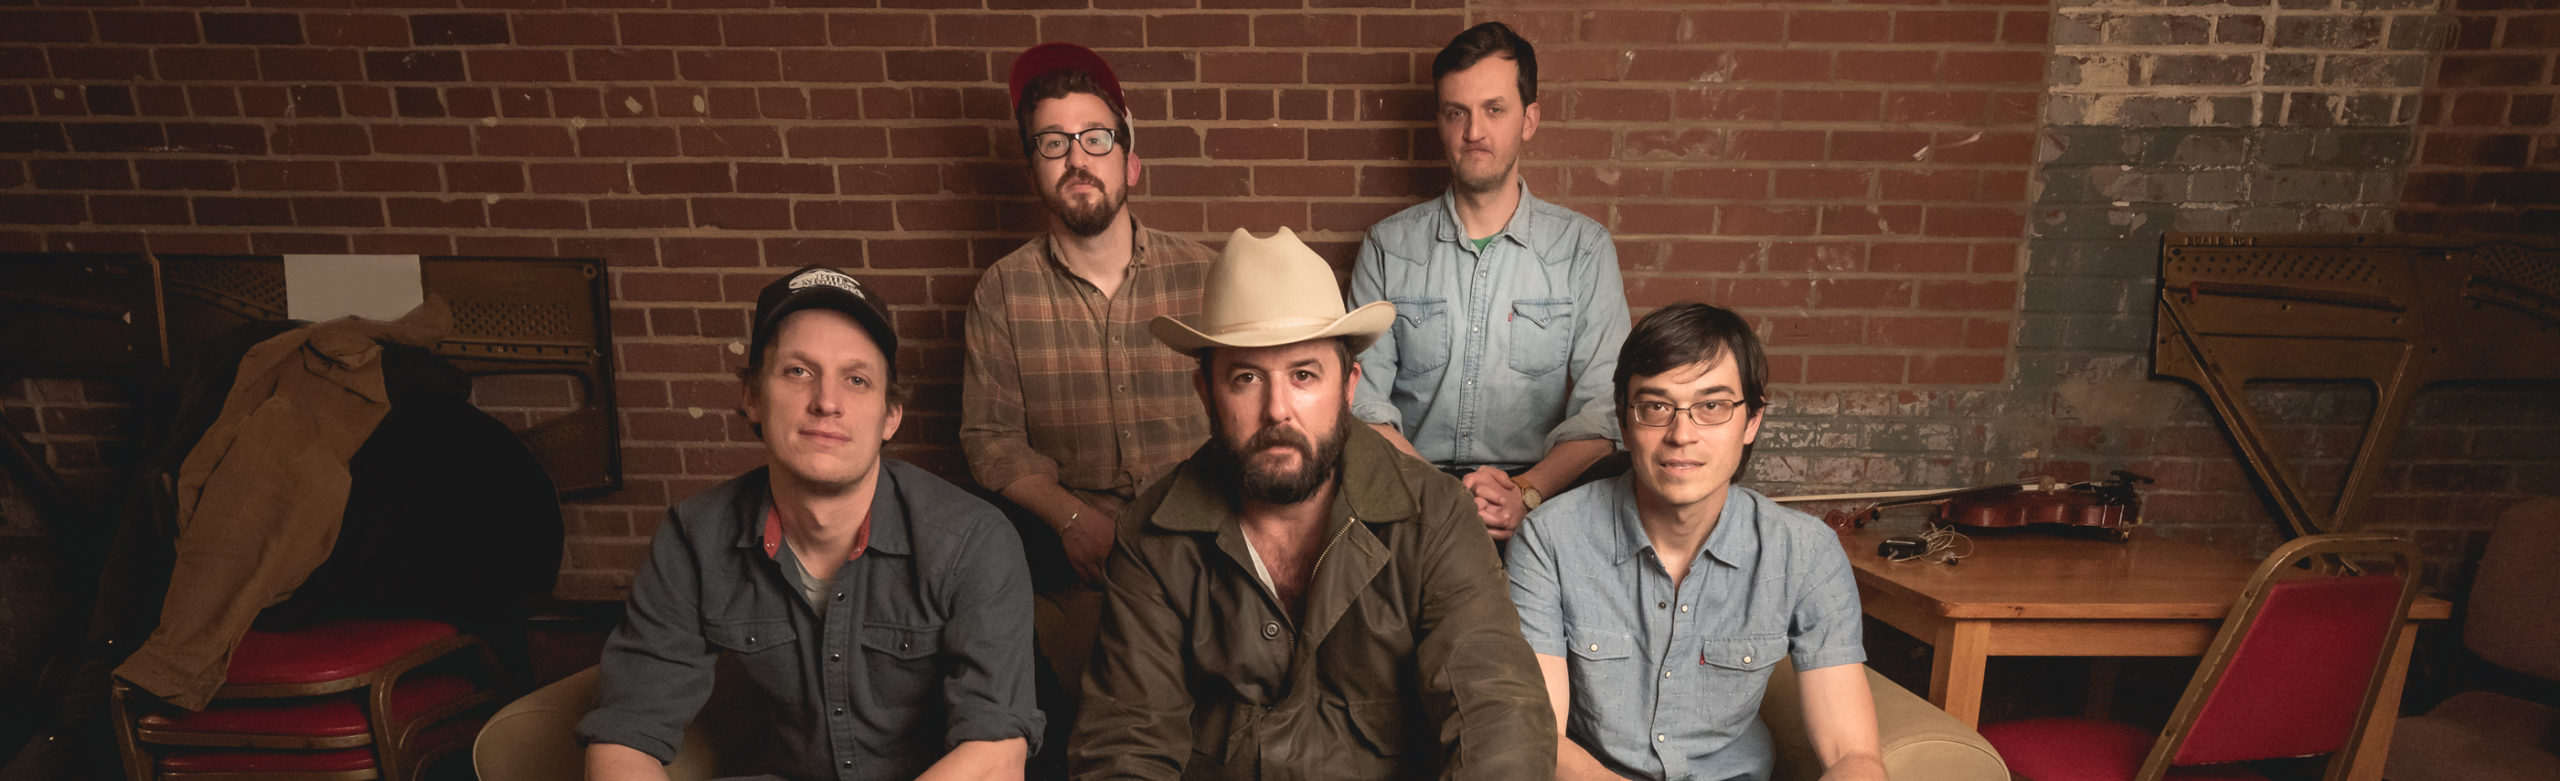 Artist Feature: Town Mountain’s Bluegrass Spiced Country, Rock ‘n’ Roll, and Boogie-Woogie Image